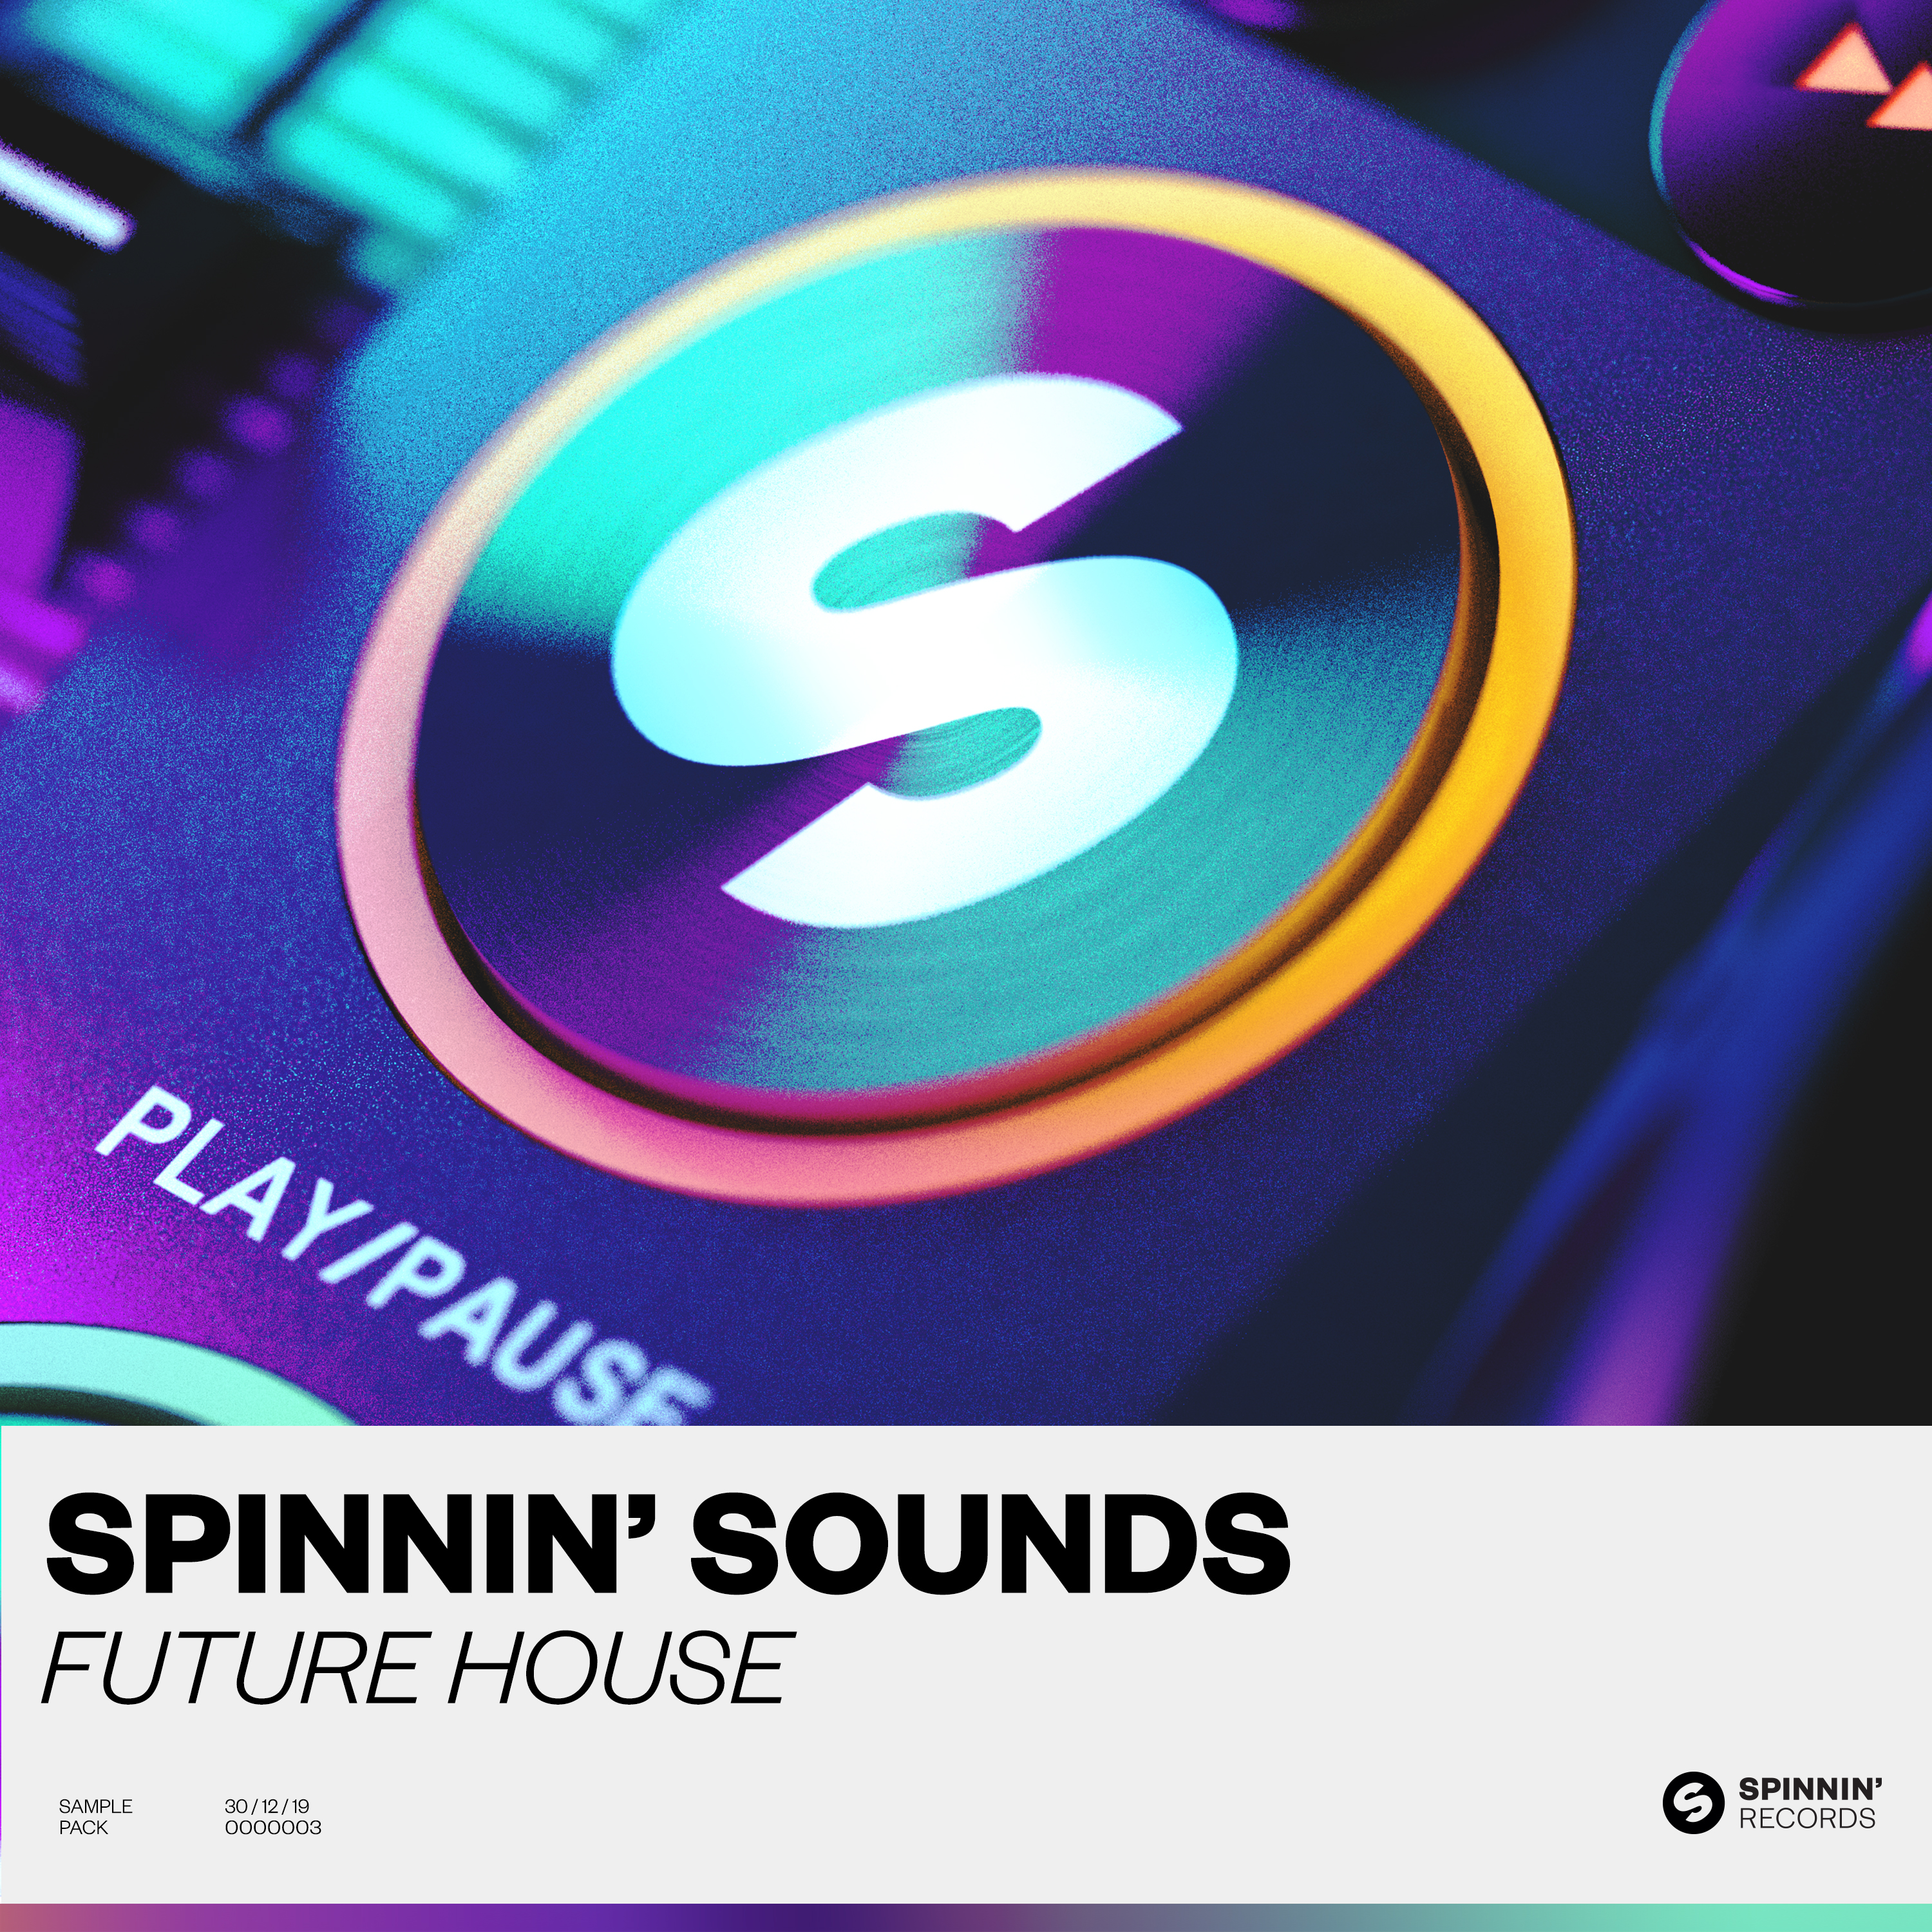 Spinnin' Sounds x Splice presents its third sample pack: Future House!